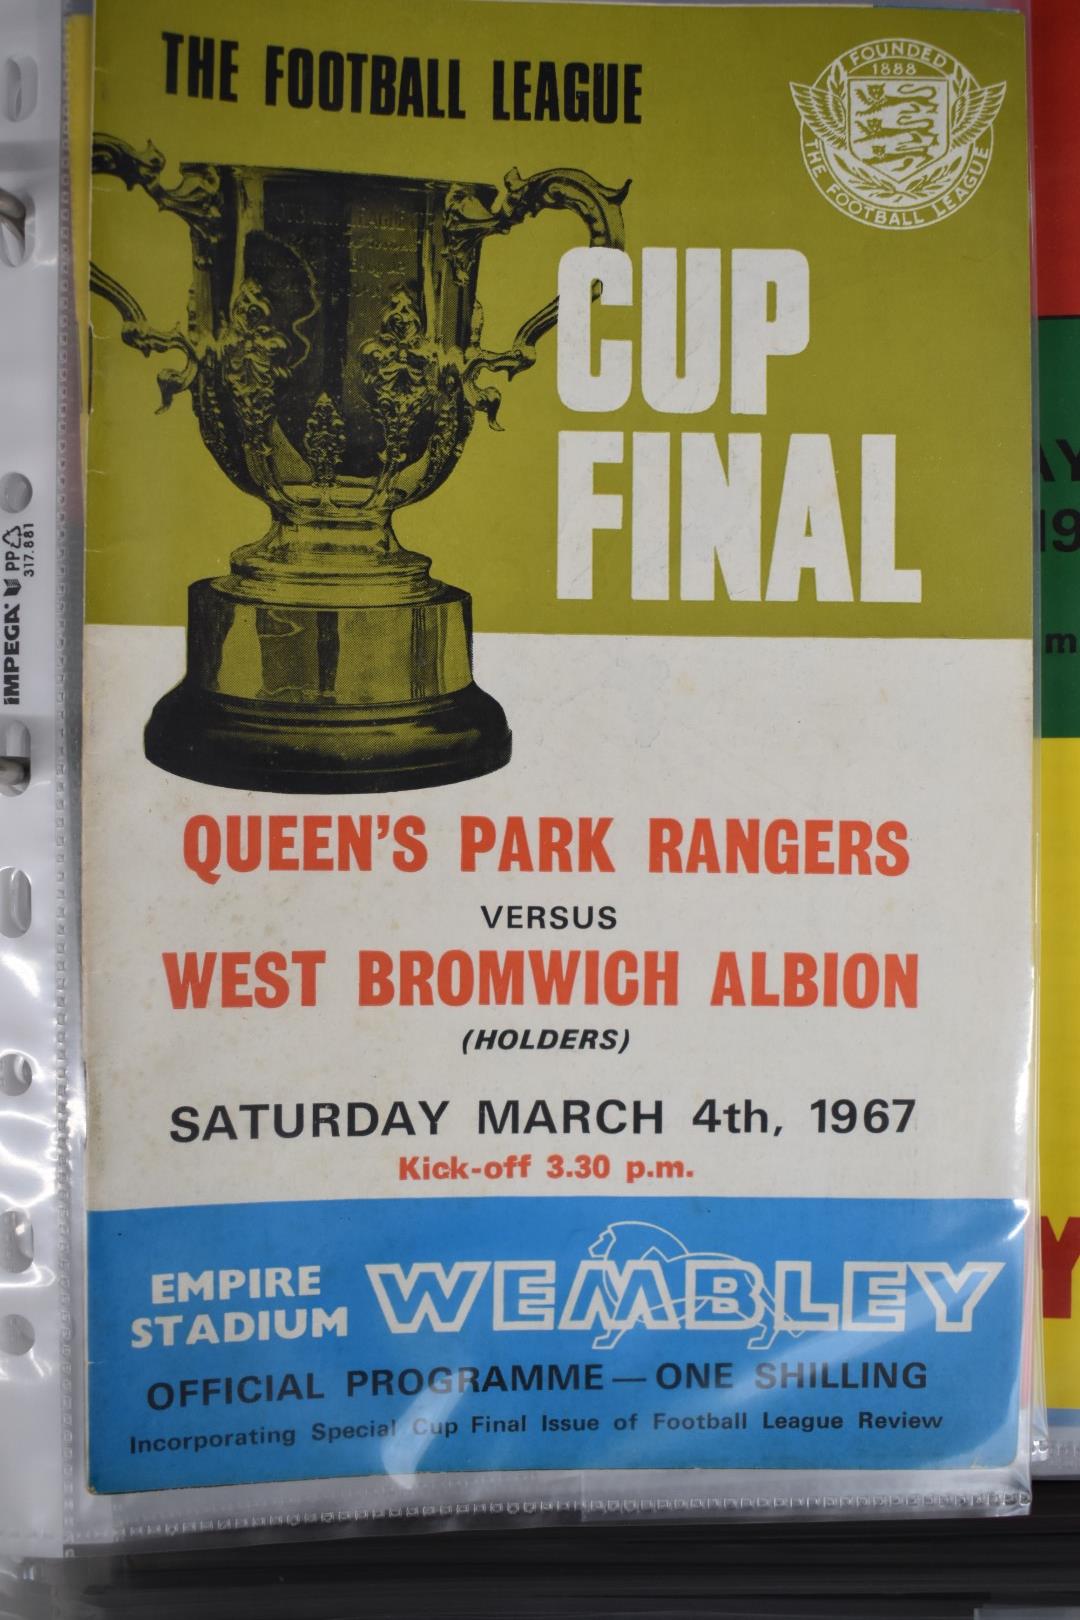 A near complete run of English League Cup football programs dating from 1986-2020 - Image 3 of 5